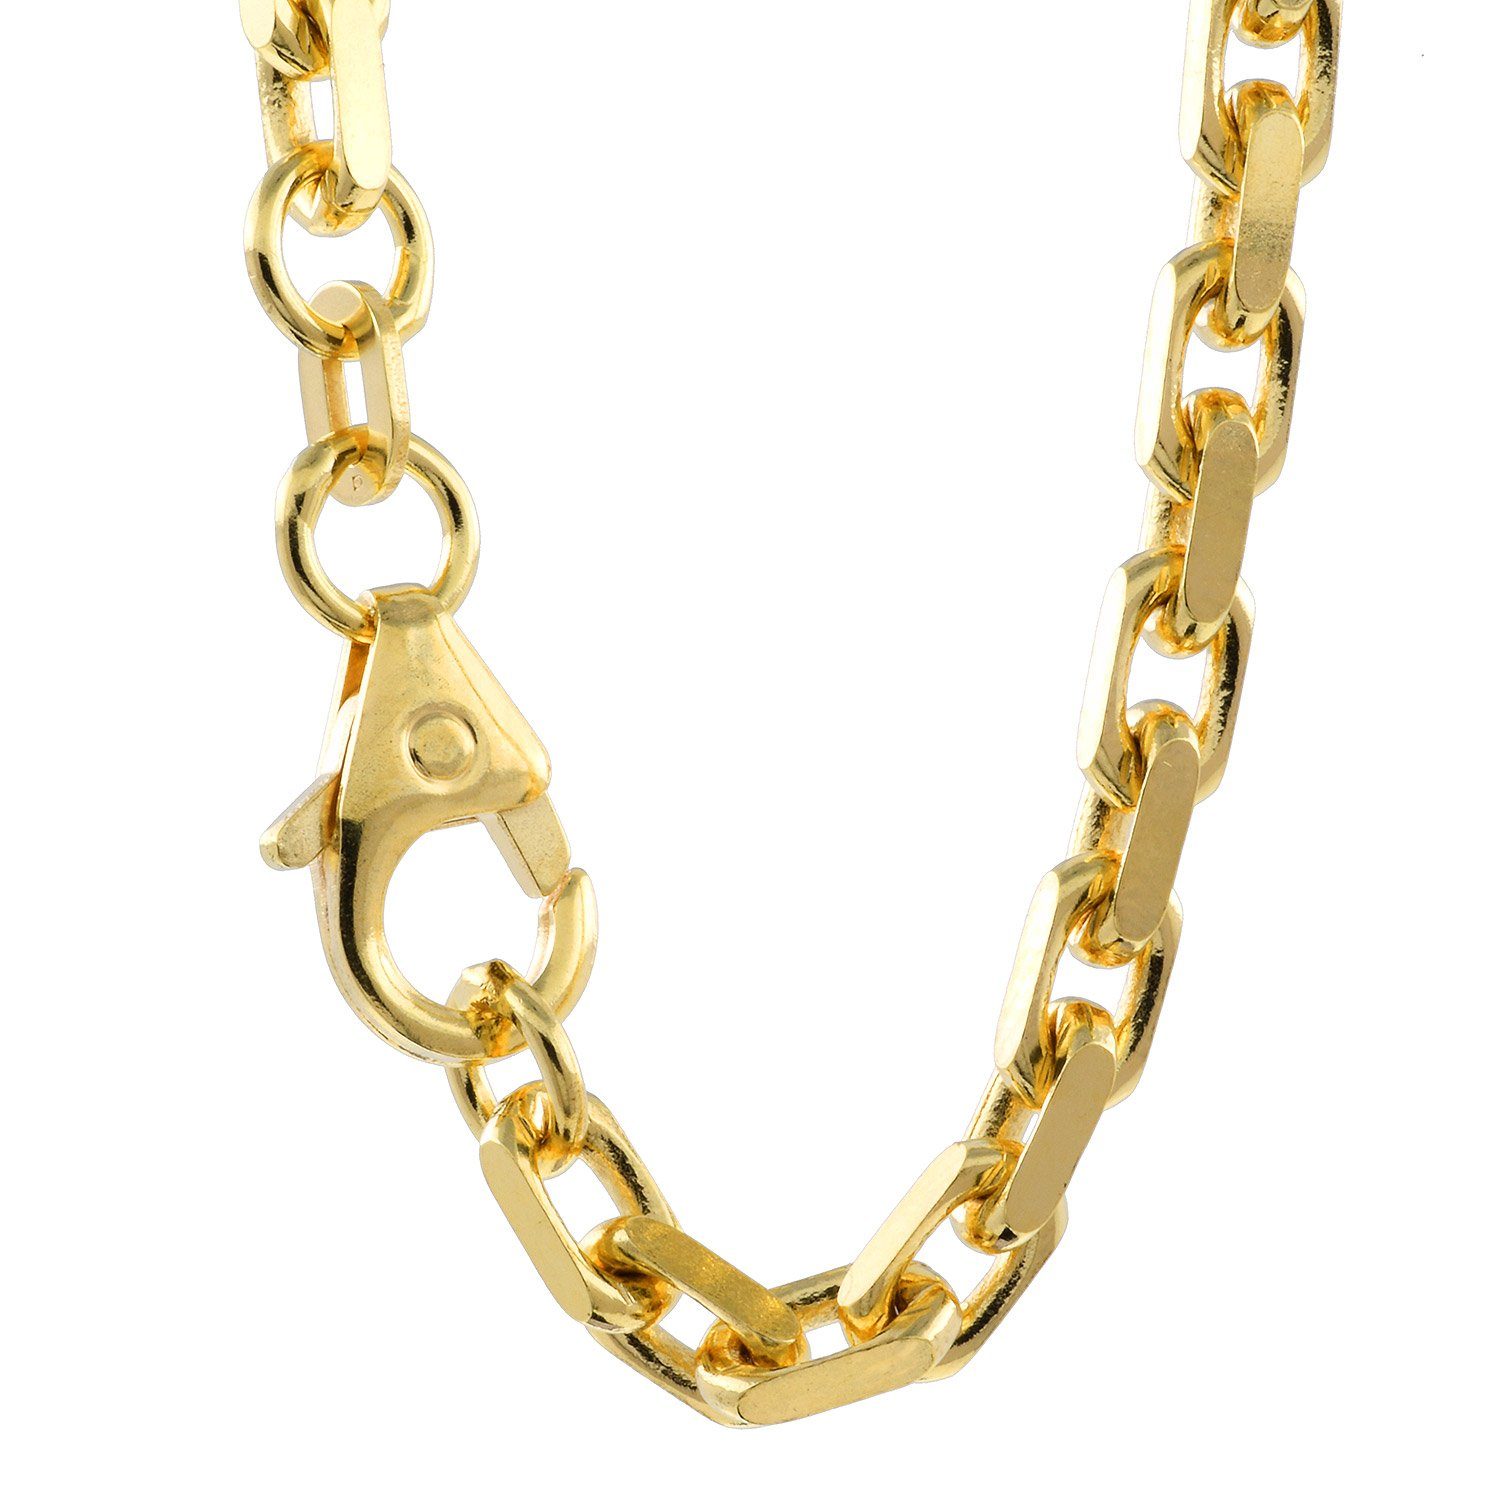 Goldkette, Made HOPLO Germany in